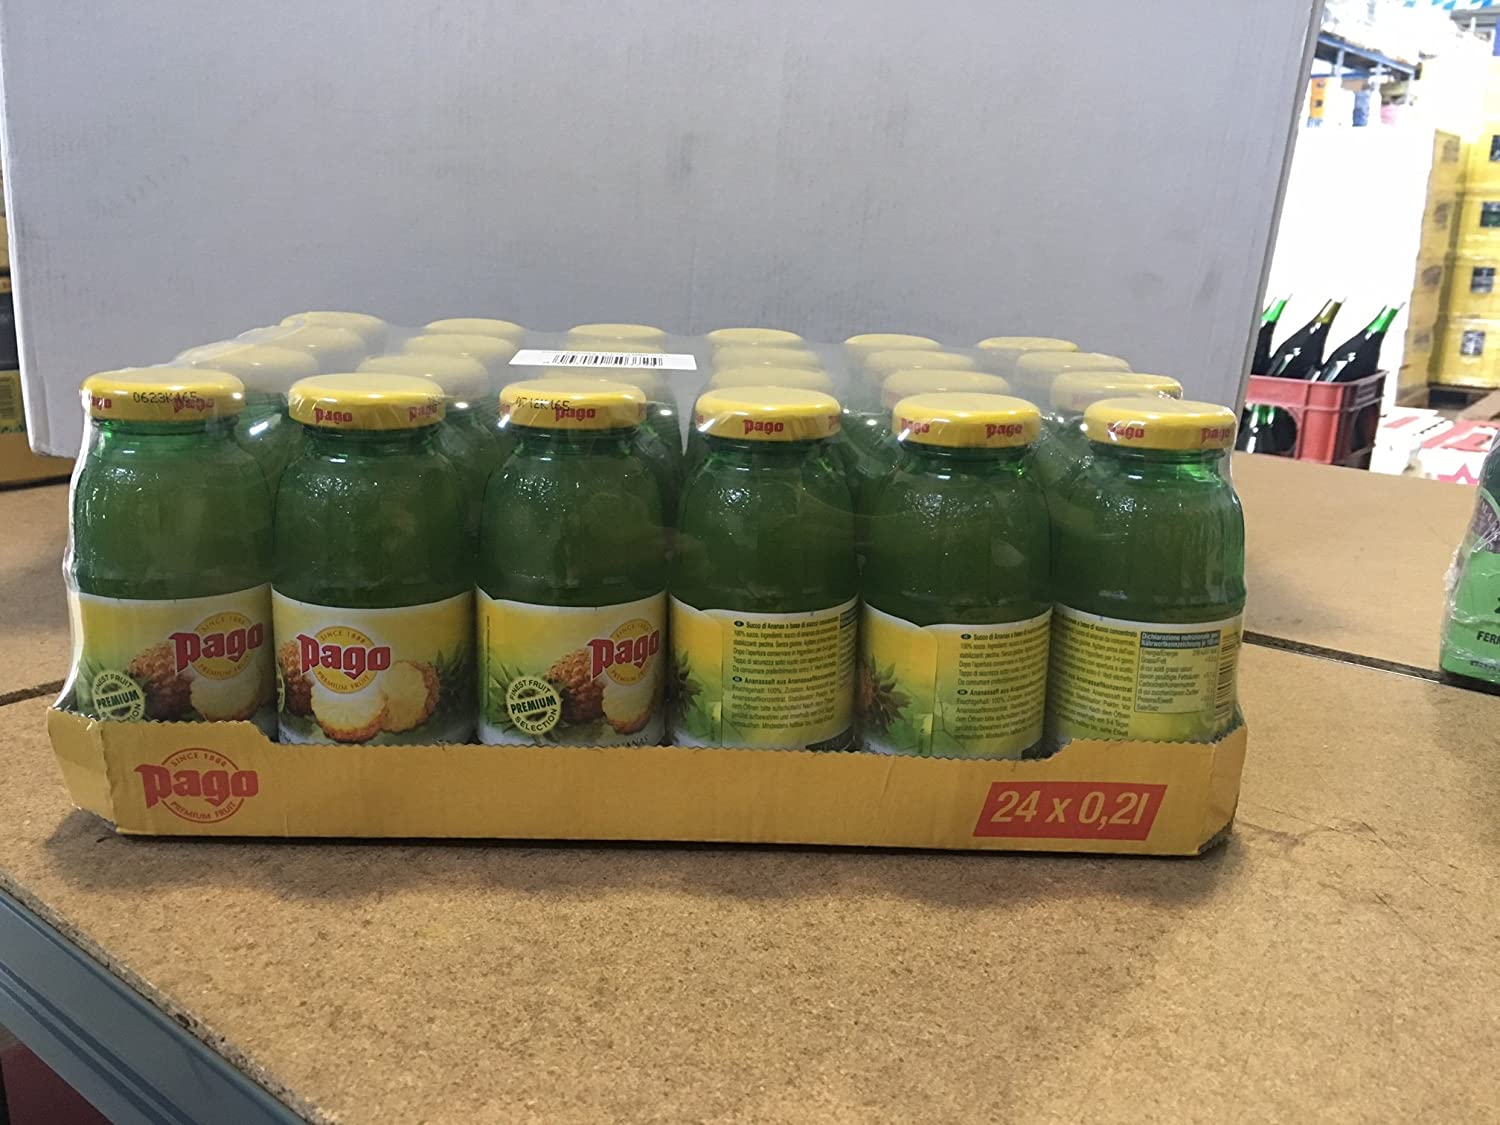 Pago Fruchtsaft - Ananas 24x0,2l